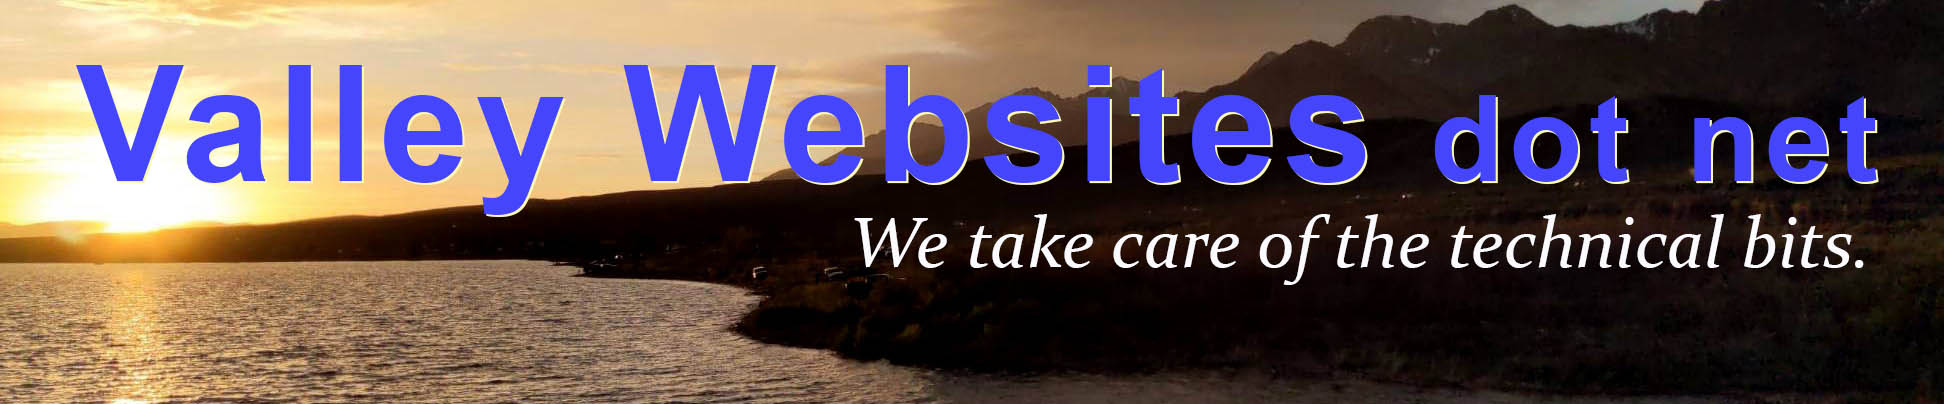 Valley Websites dot net: We take care of the technical bits